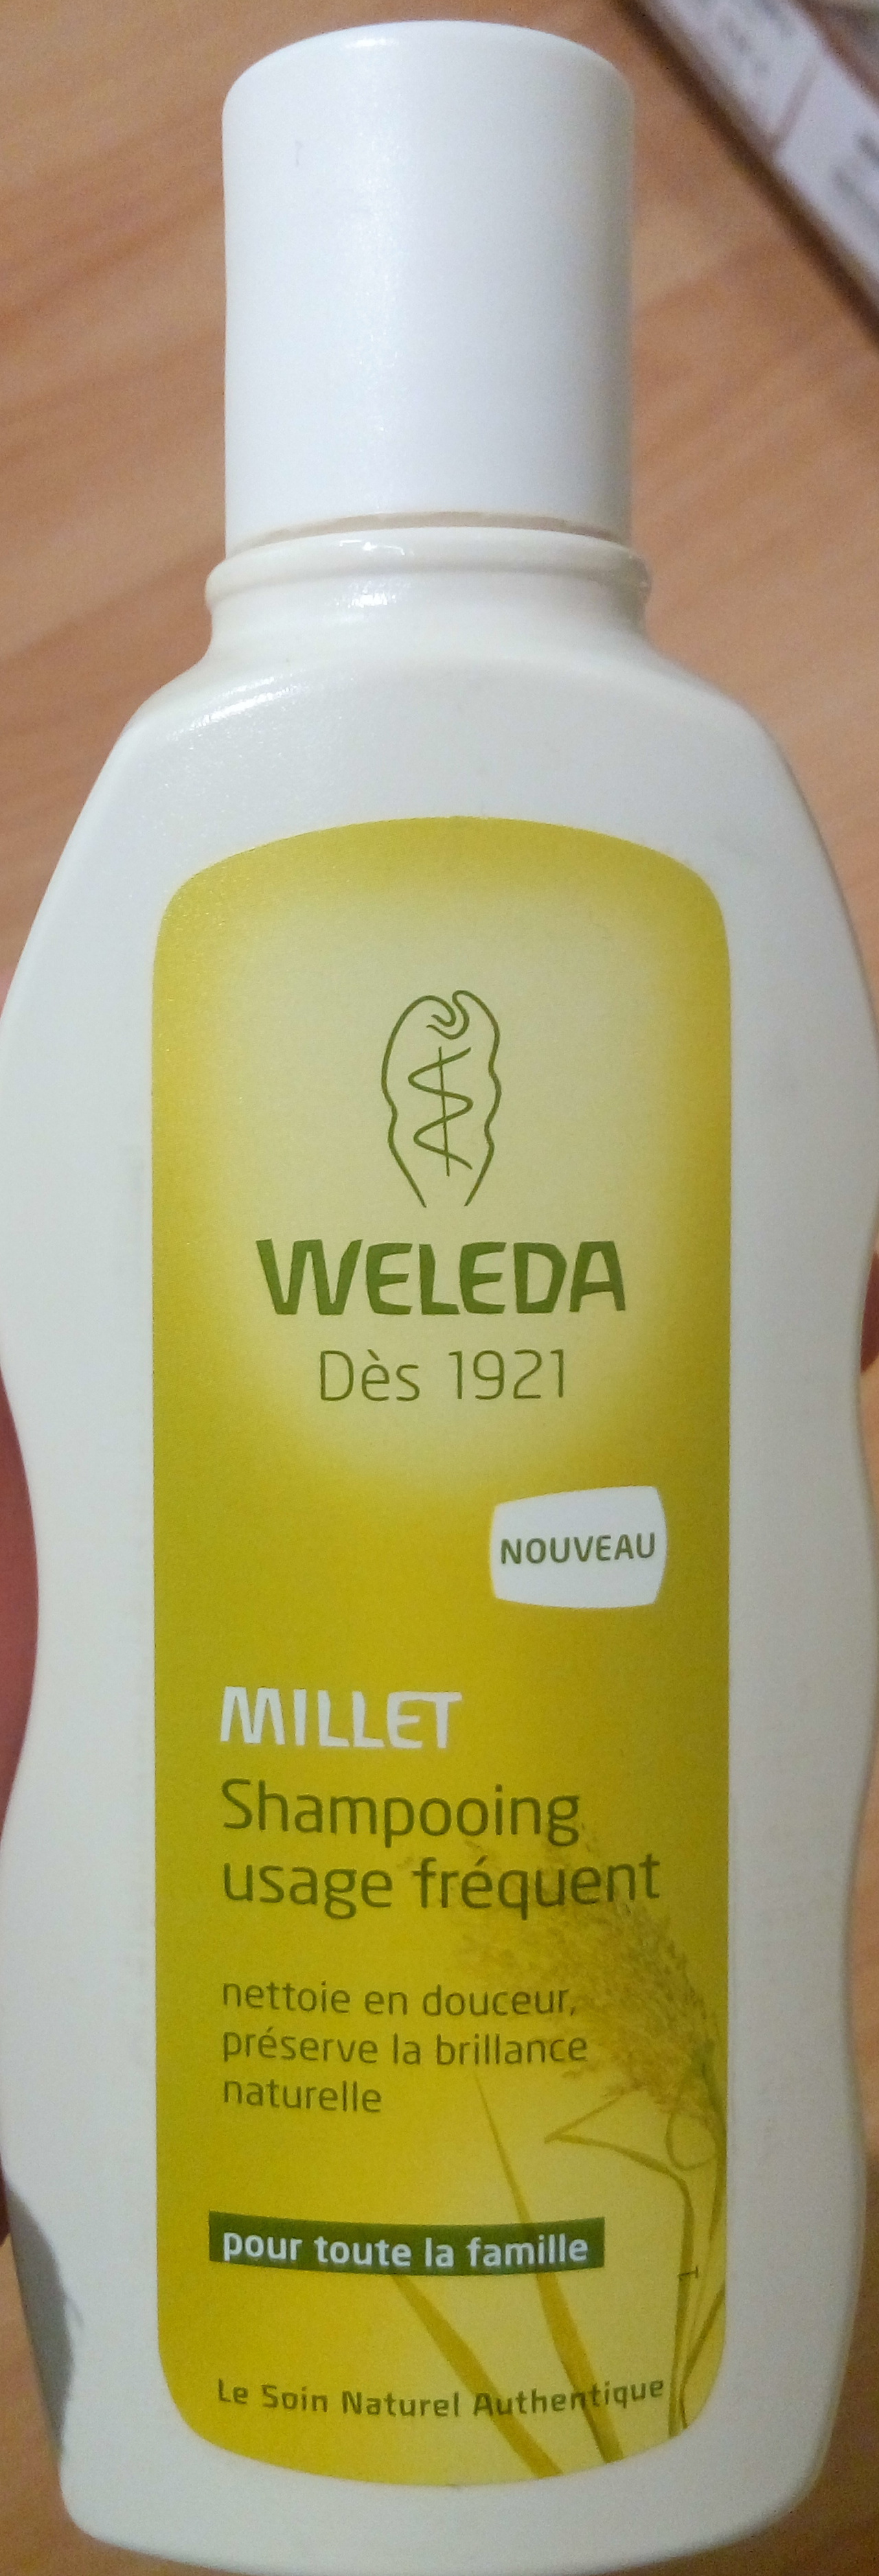 Shampooing usage fréquent Millet - Product - fr